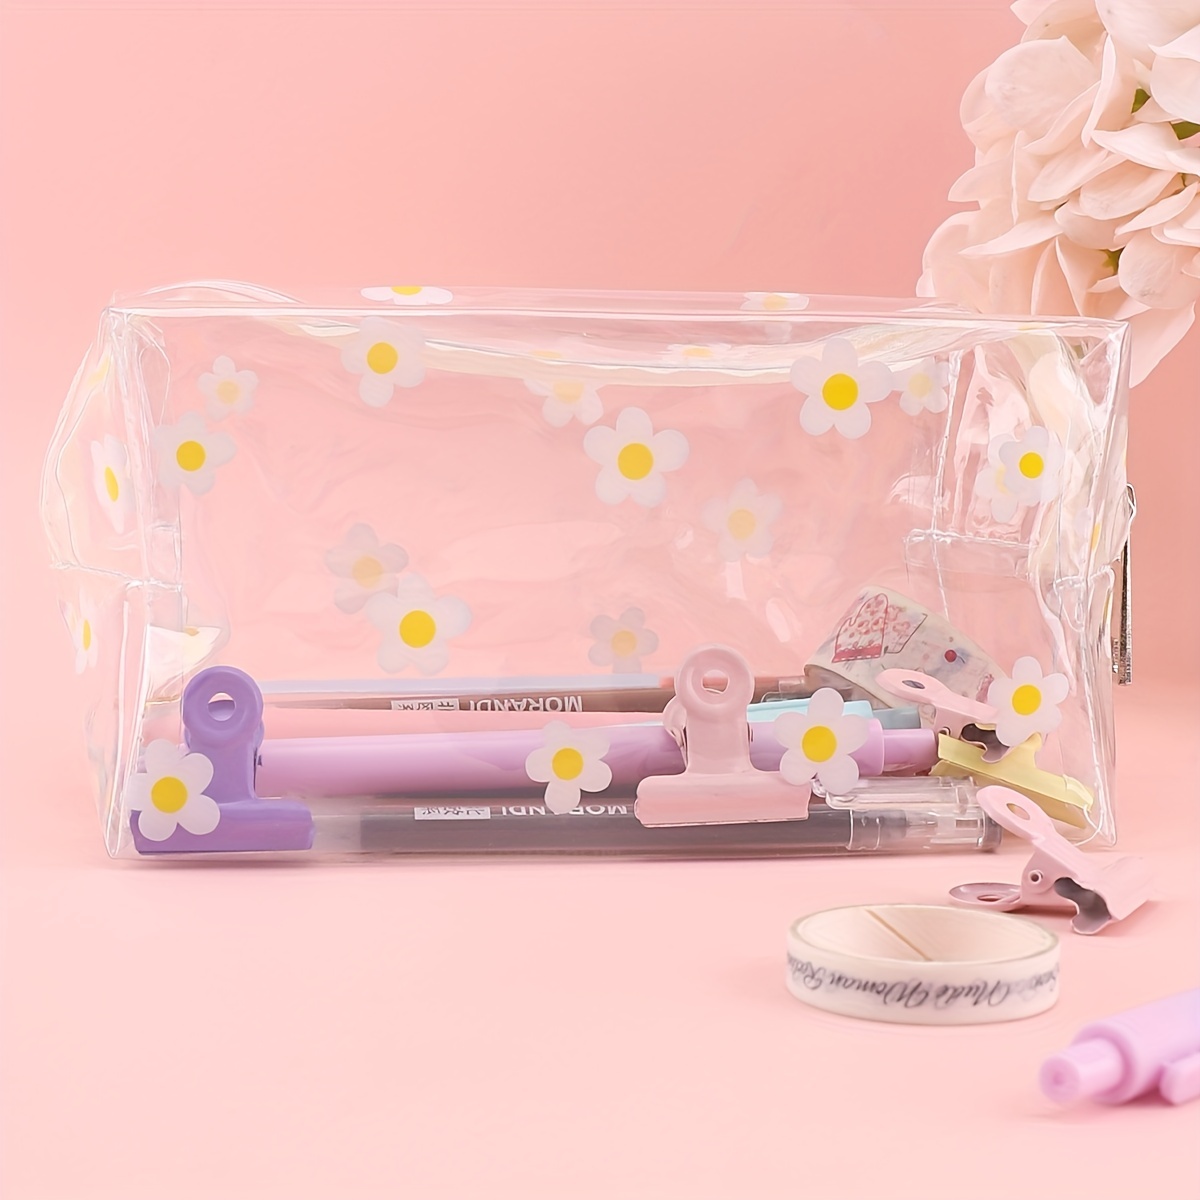 Kawaii Cute Pencil Bag Small Flowers Pencil Cases Cute Simple Pen Bag  Storage Bags School Supplies Stationery Gift For Kids